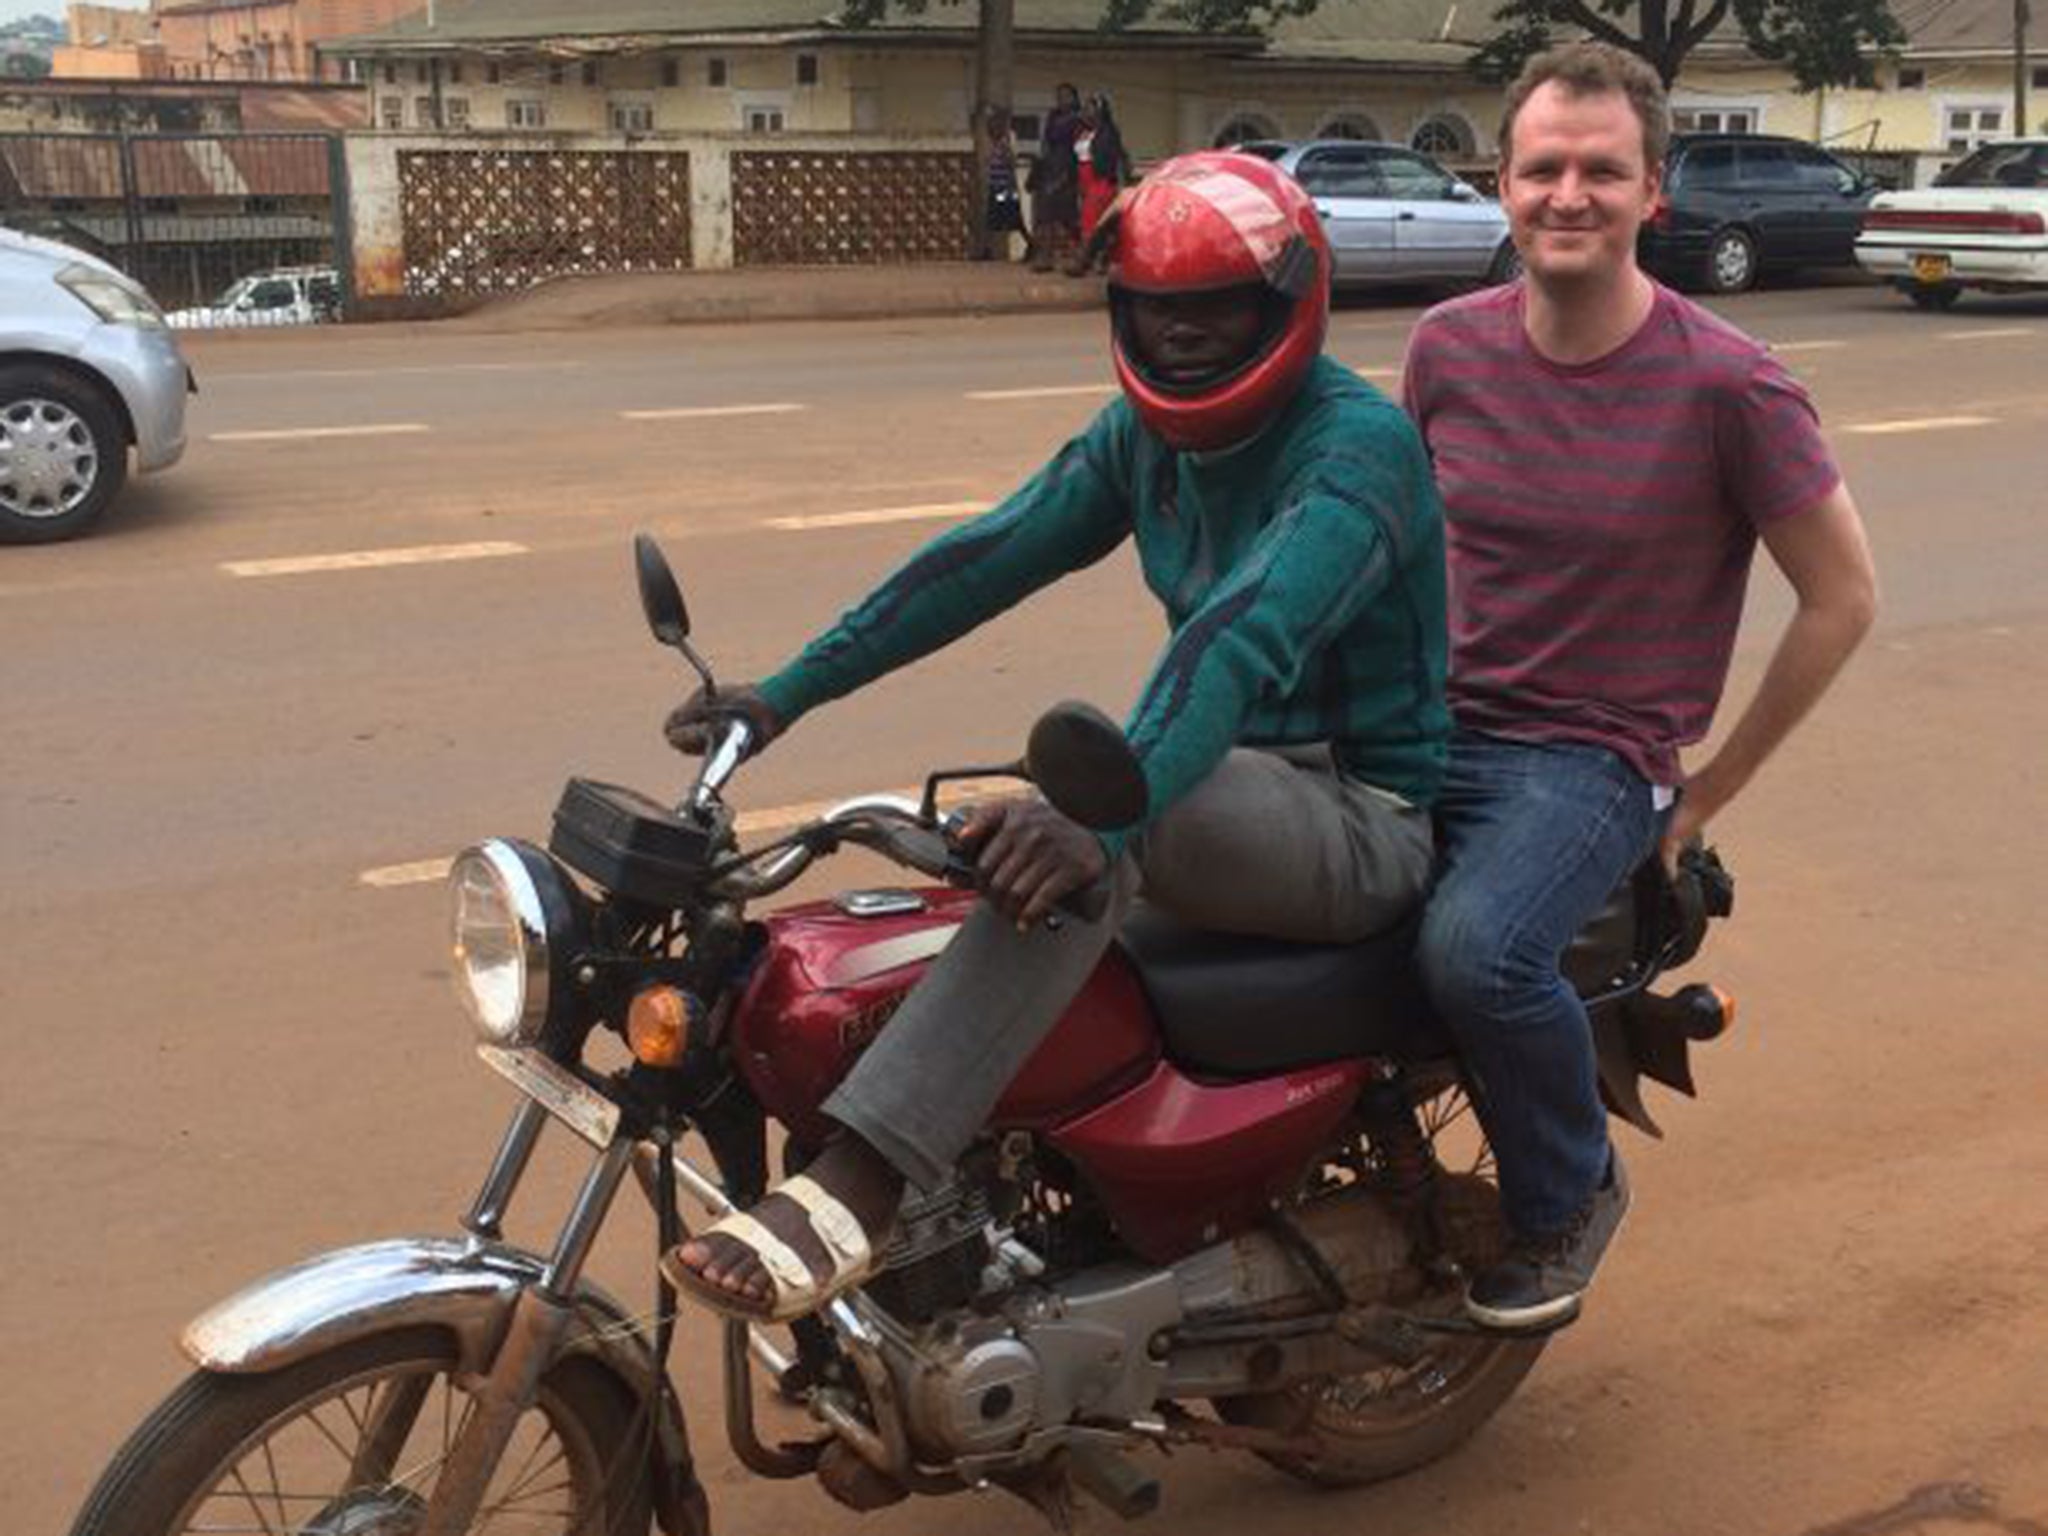 The boda-boda taxis i.e. motorbikes of the Ugandan capital Kampala are the choice form of transport for just about everyone